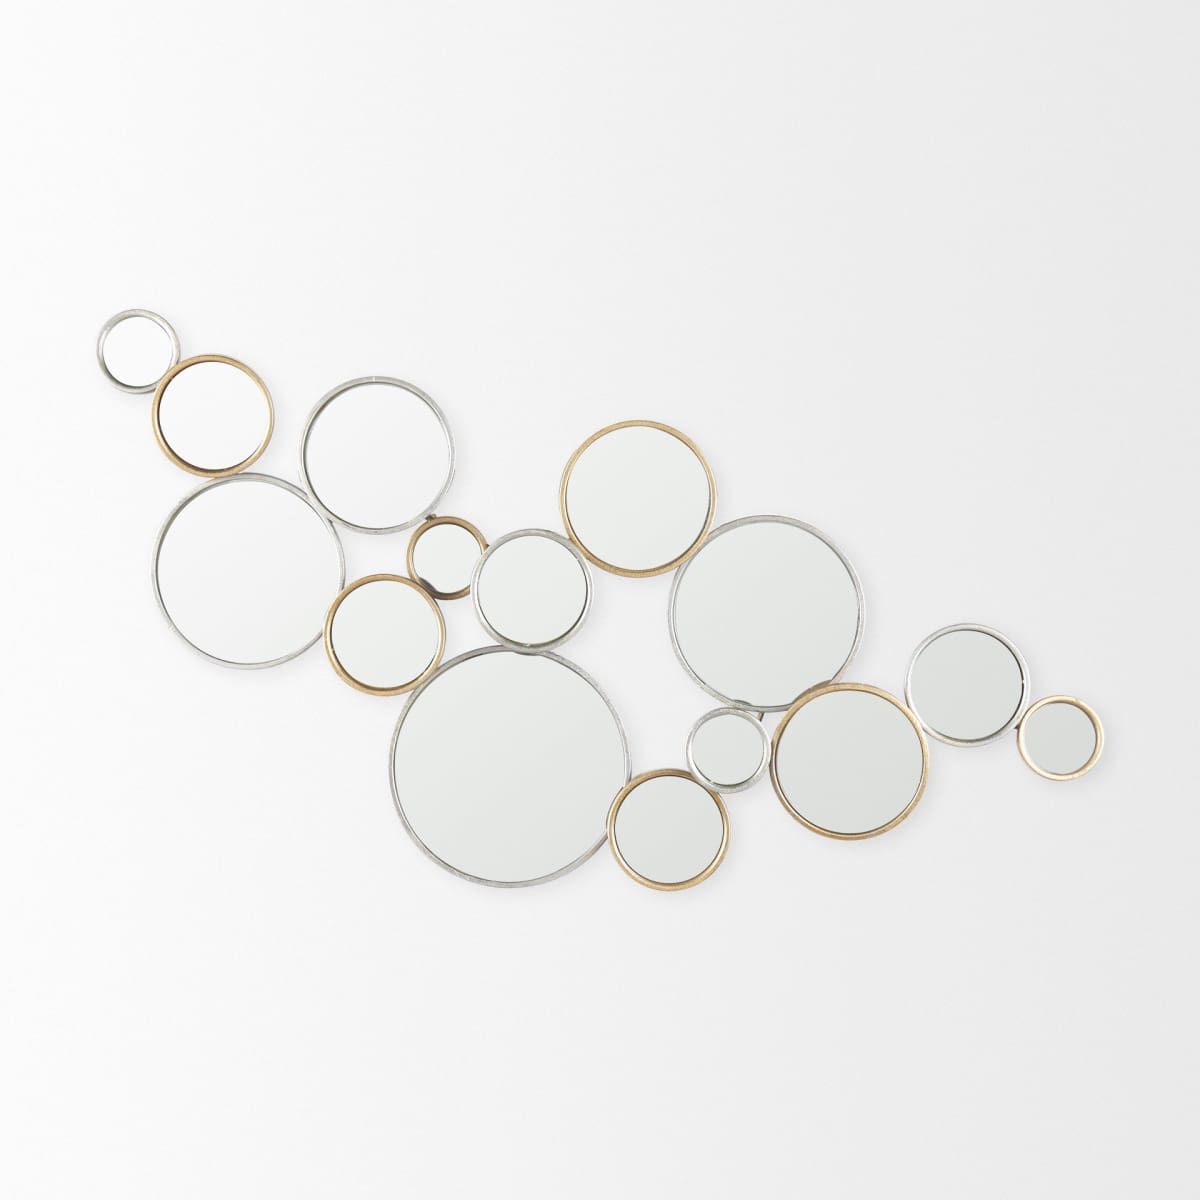 Halenday Wall Mirror Gold Metal - wall-mirrors-grouped